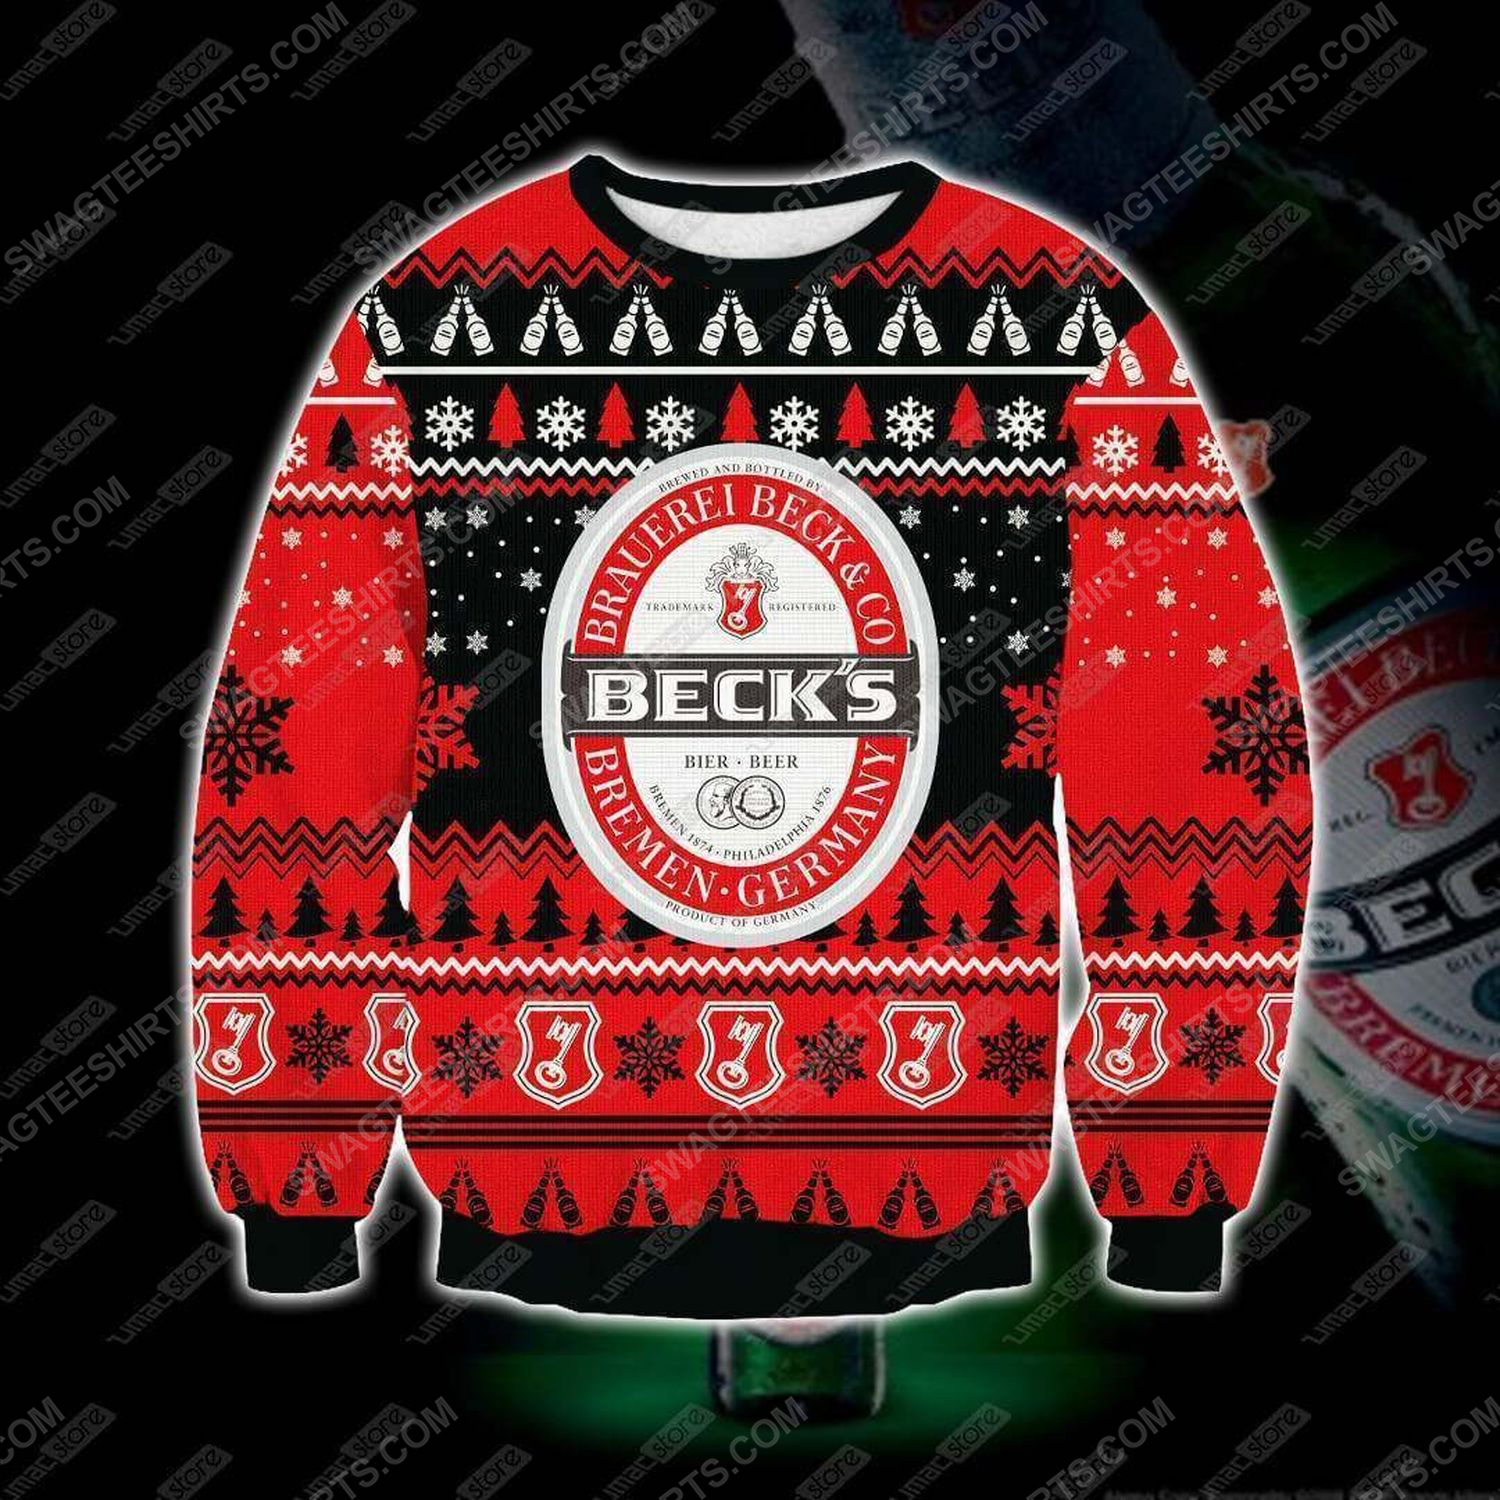 Beck's bremen germany ugly christmas sweater